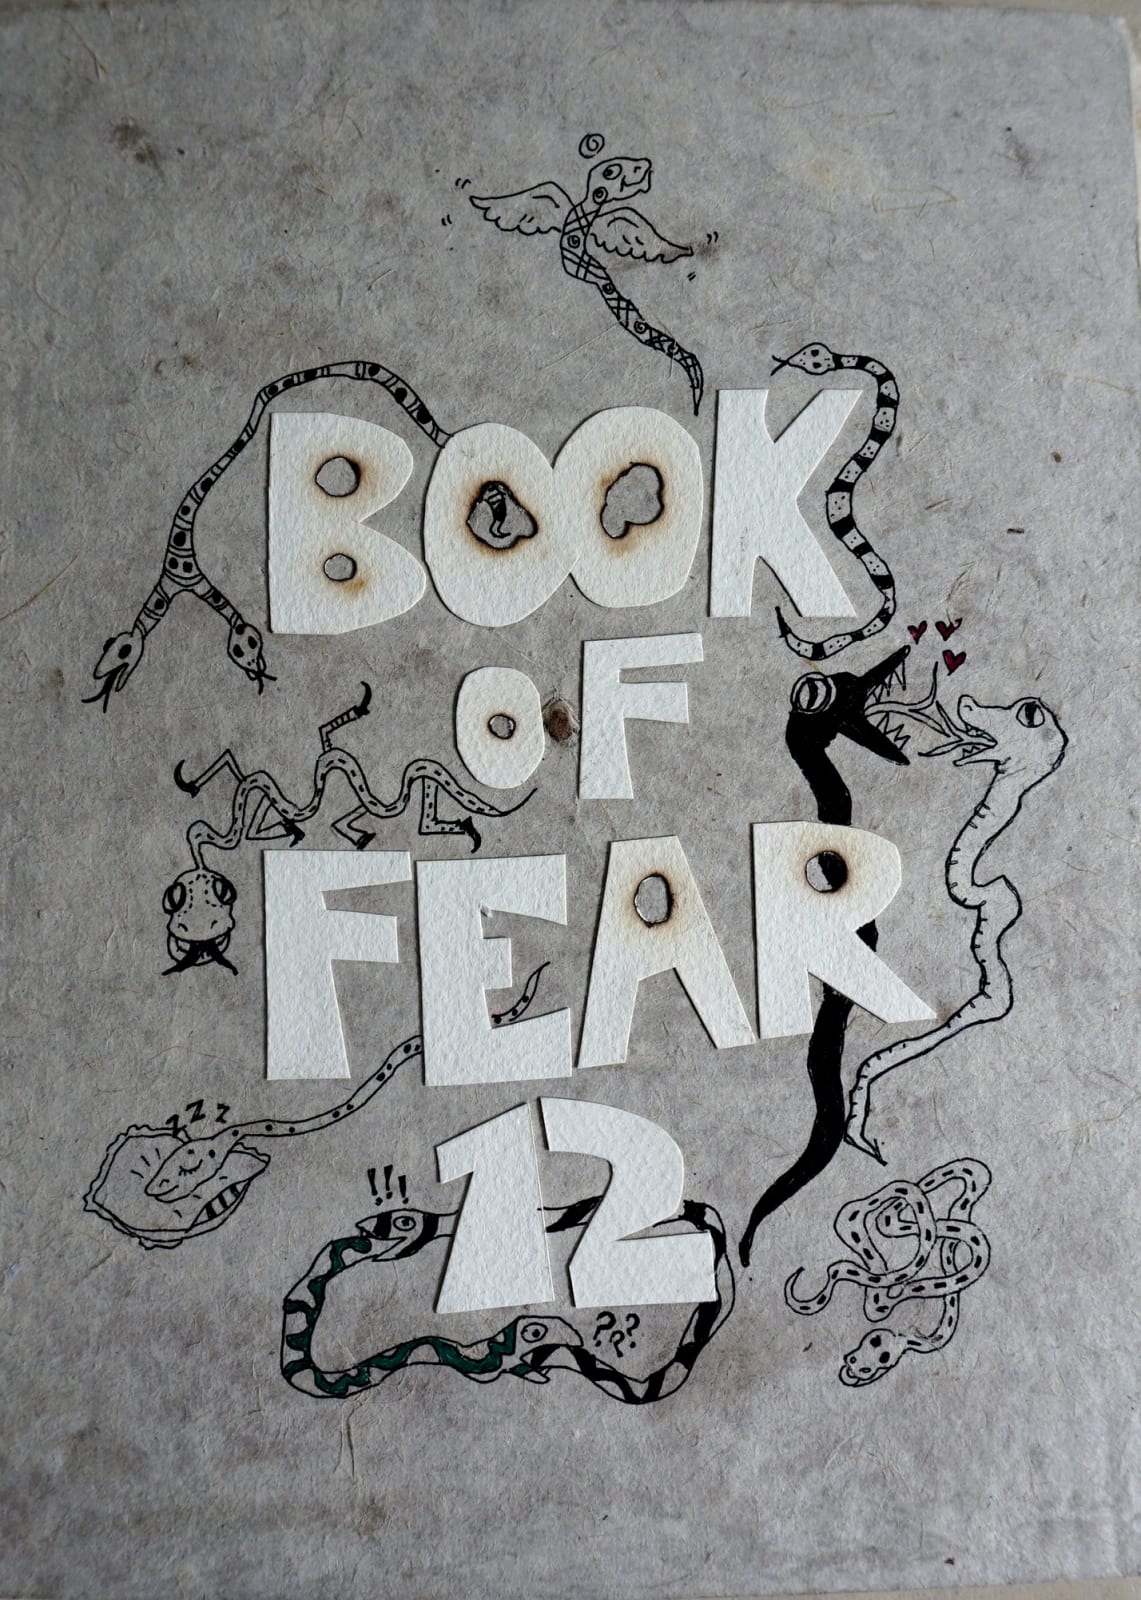 AMRITAH SEN, BOOK OF FEAR 12 - COLLECTIVE FEAR OF SNAKES COLLECTED FROM NEPAL, 2017